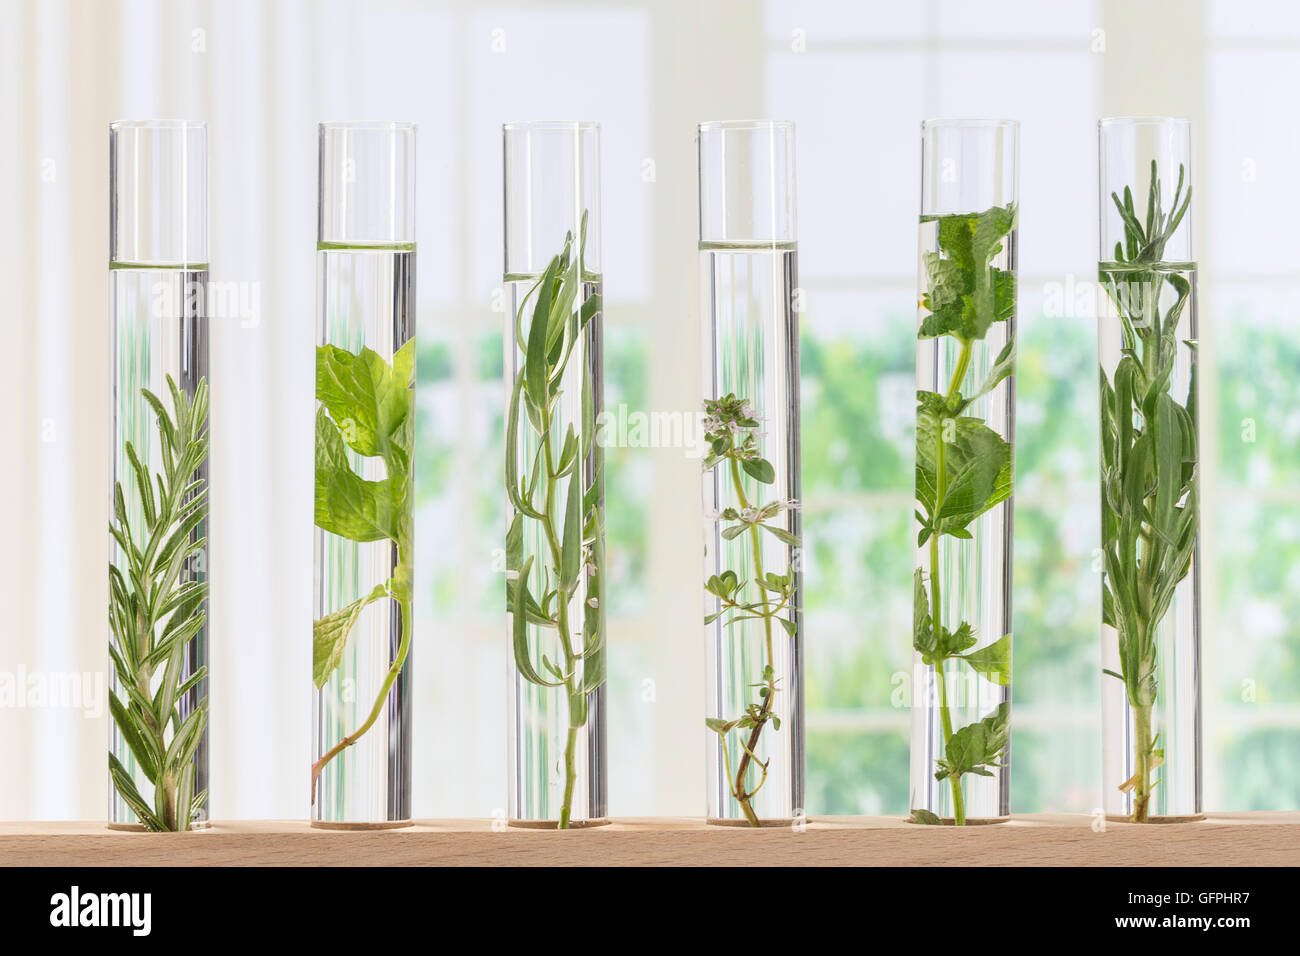 Flowers and plants in test tubes Stock Photo